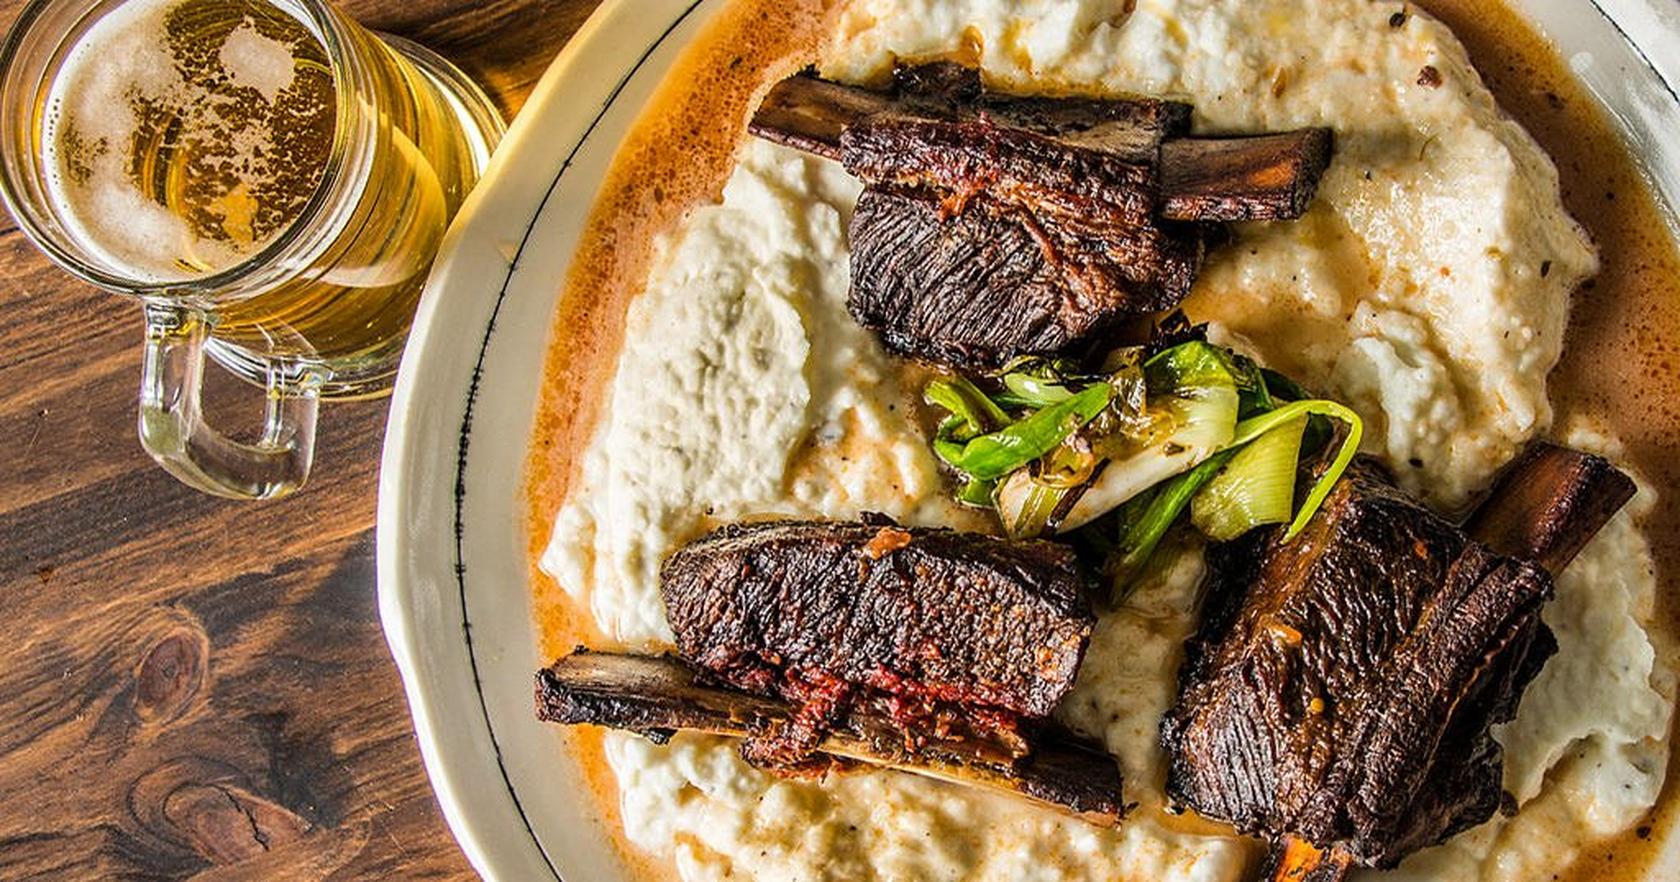 Braised Beef Short Ribs with Mashed Potatoes